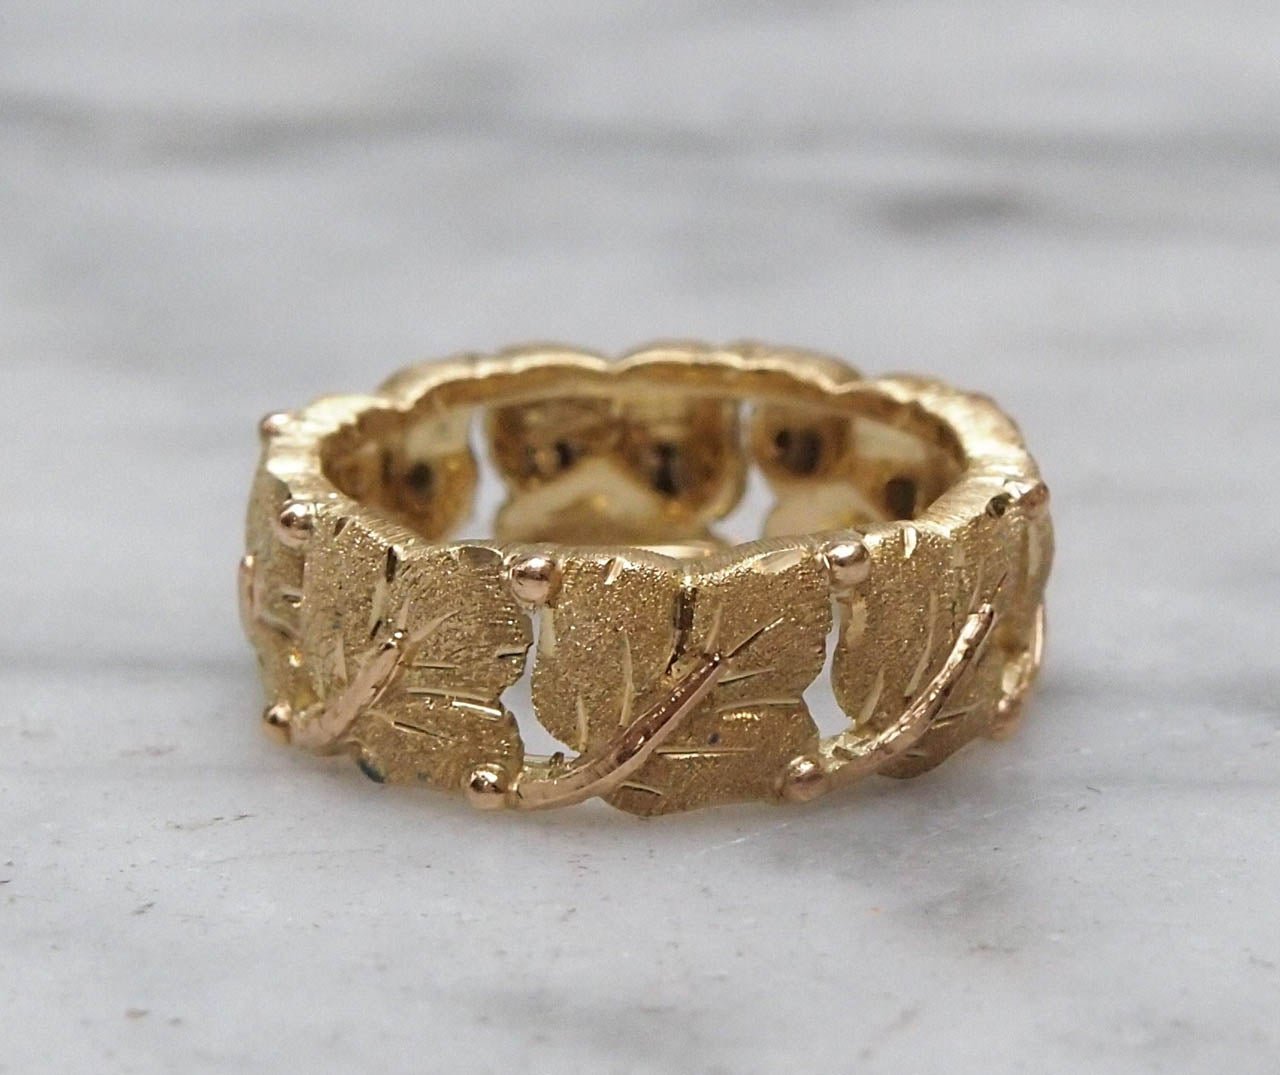 Delicate textured 18 k Gold leaf ring. size 6.5
Signed M. Buccellati.
Coming with certificate and original box.